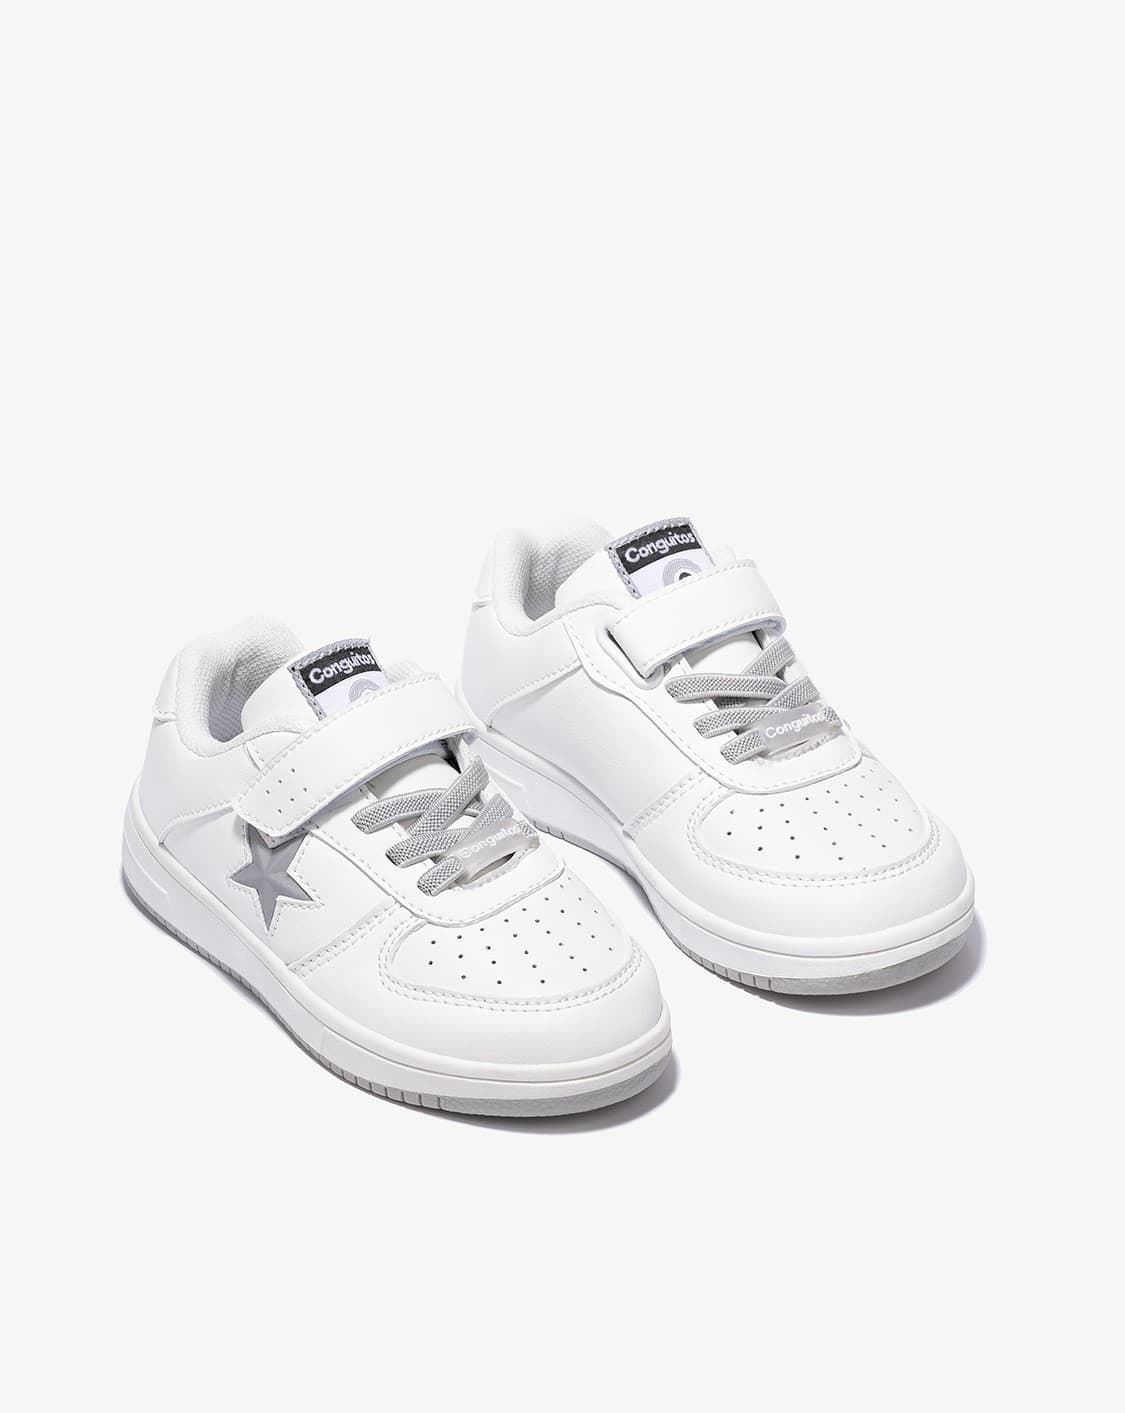 Conguitos Sneakers with Lights Unisex White Star - Image 4